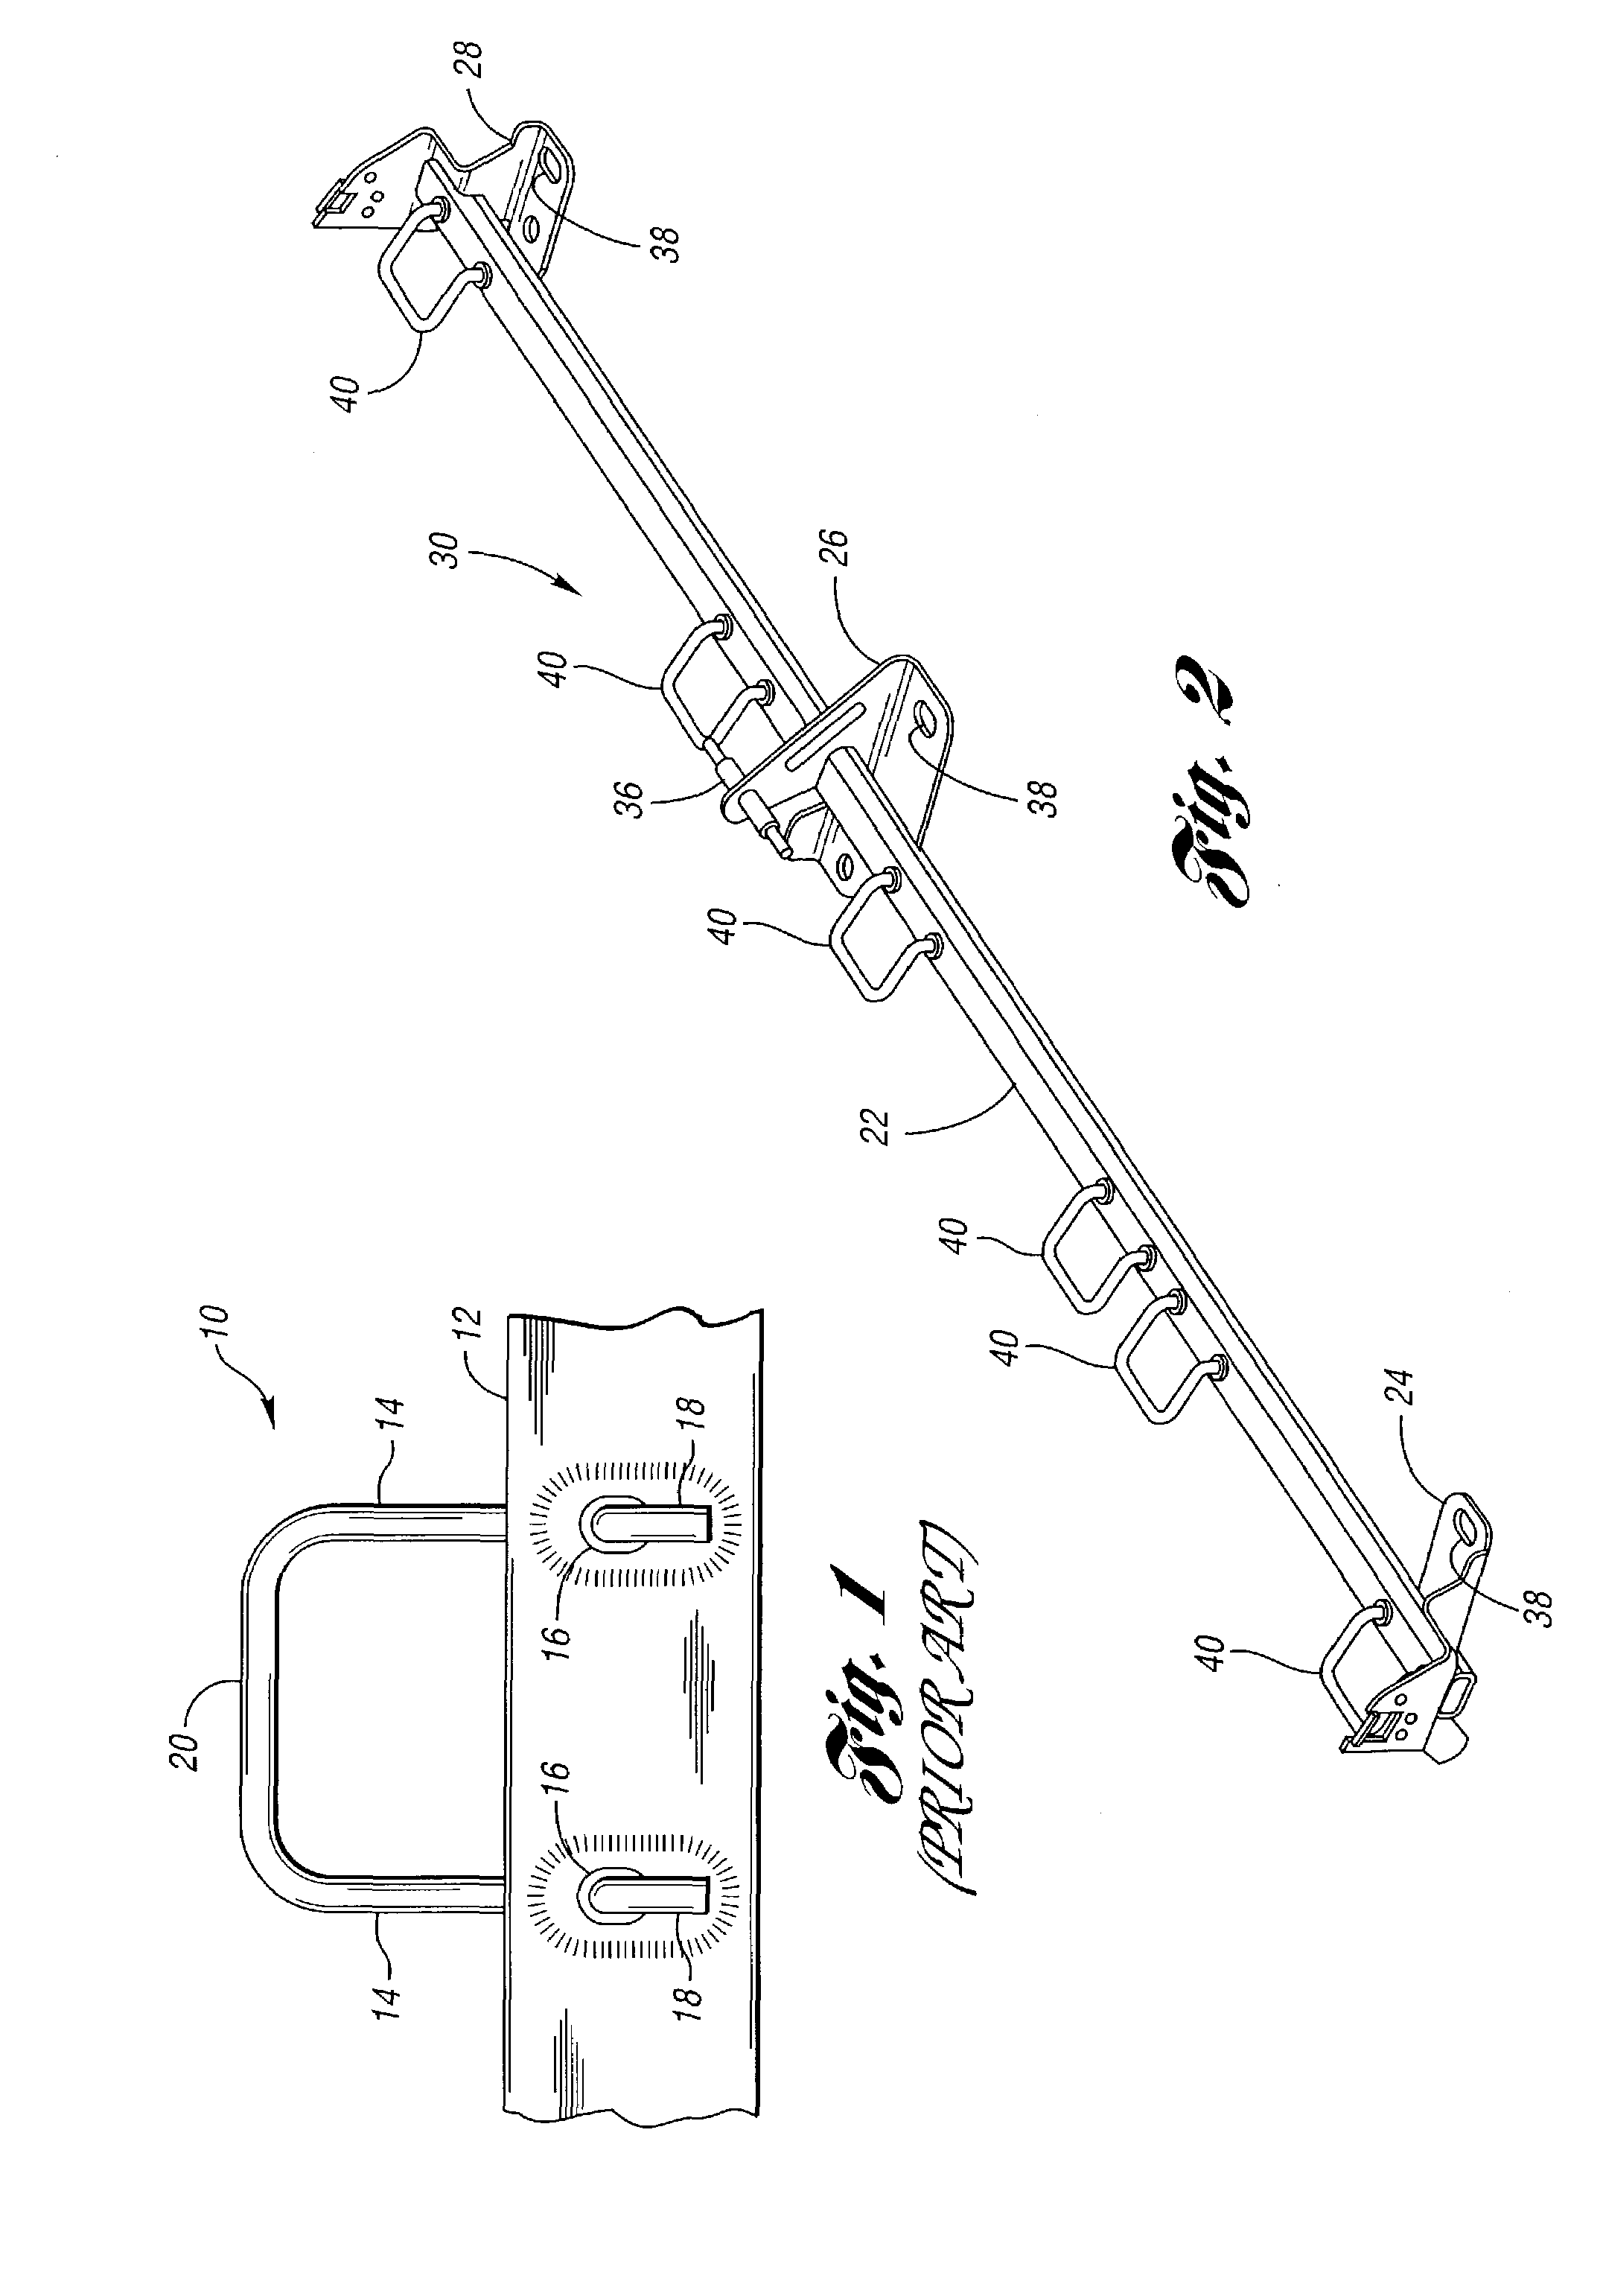 Restraint anchorage for a child restraint system